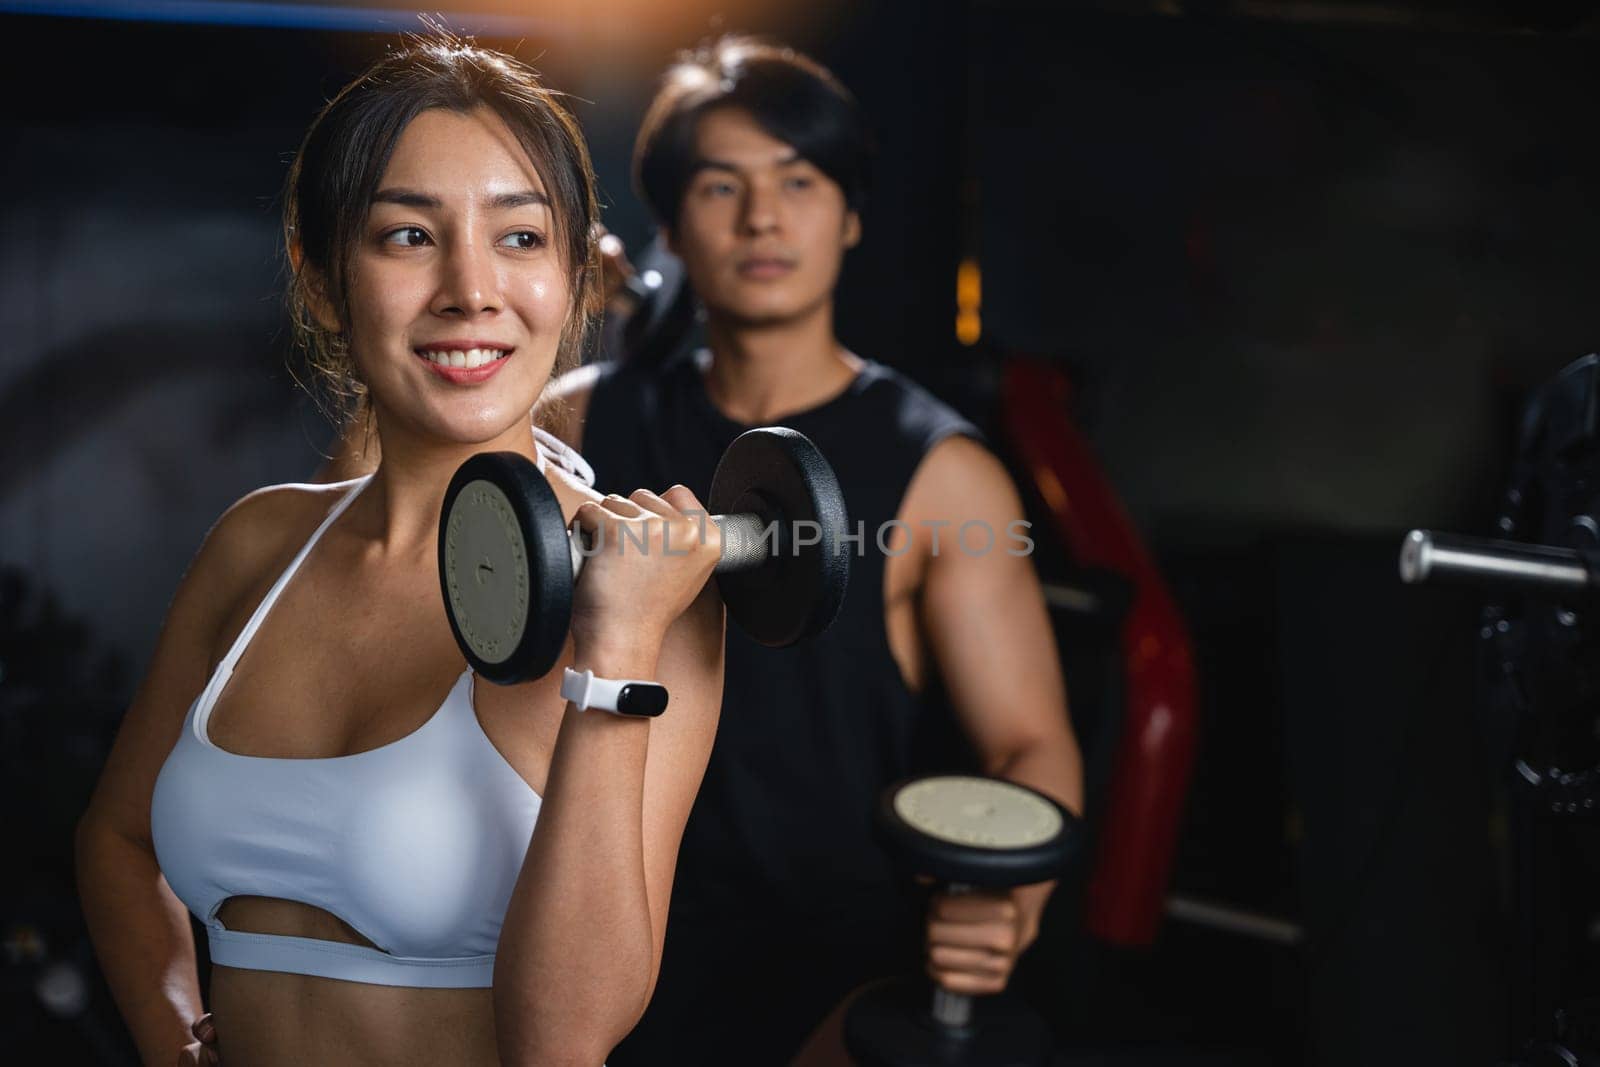 A fit couple in black workout clothes, smiling cheerfully while holding dumbbells, works together to build their muscular bodies and achieve their fitness goals. lifestyle fitness concept